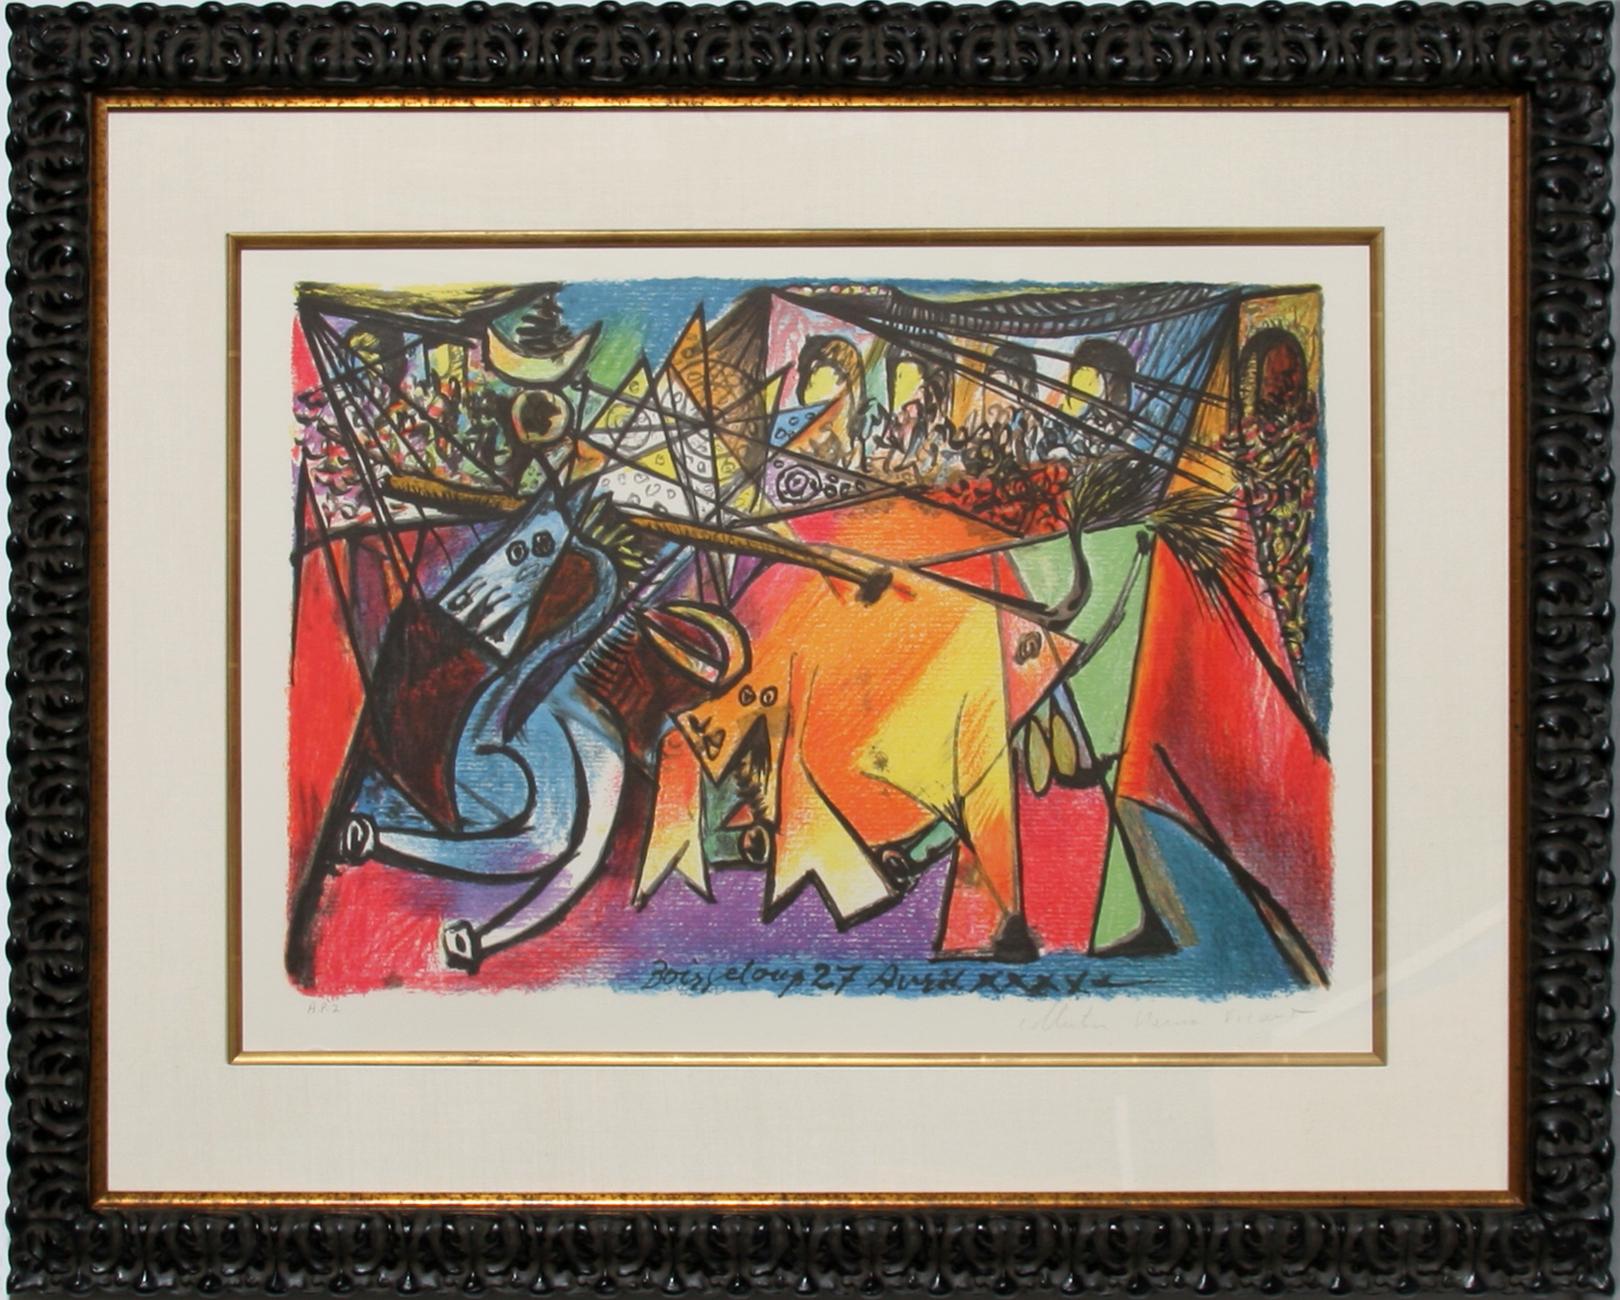 Comprised of shapes with lines and sharp angles, this composition depicting the running of the bulls is hectic and energized. Rendered in gradiated rainbow colors, the animals in this Pablo Picasso print run along the street surrounded by buildings